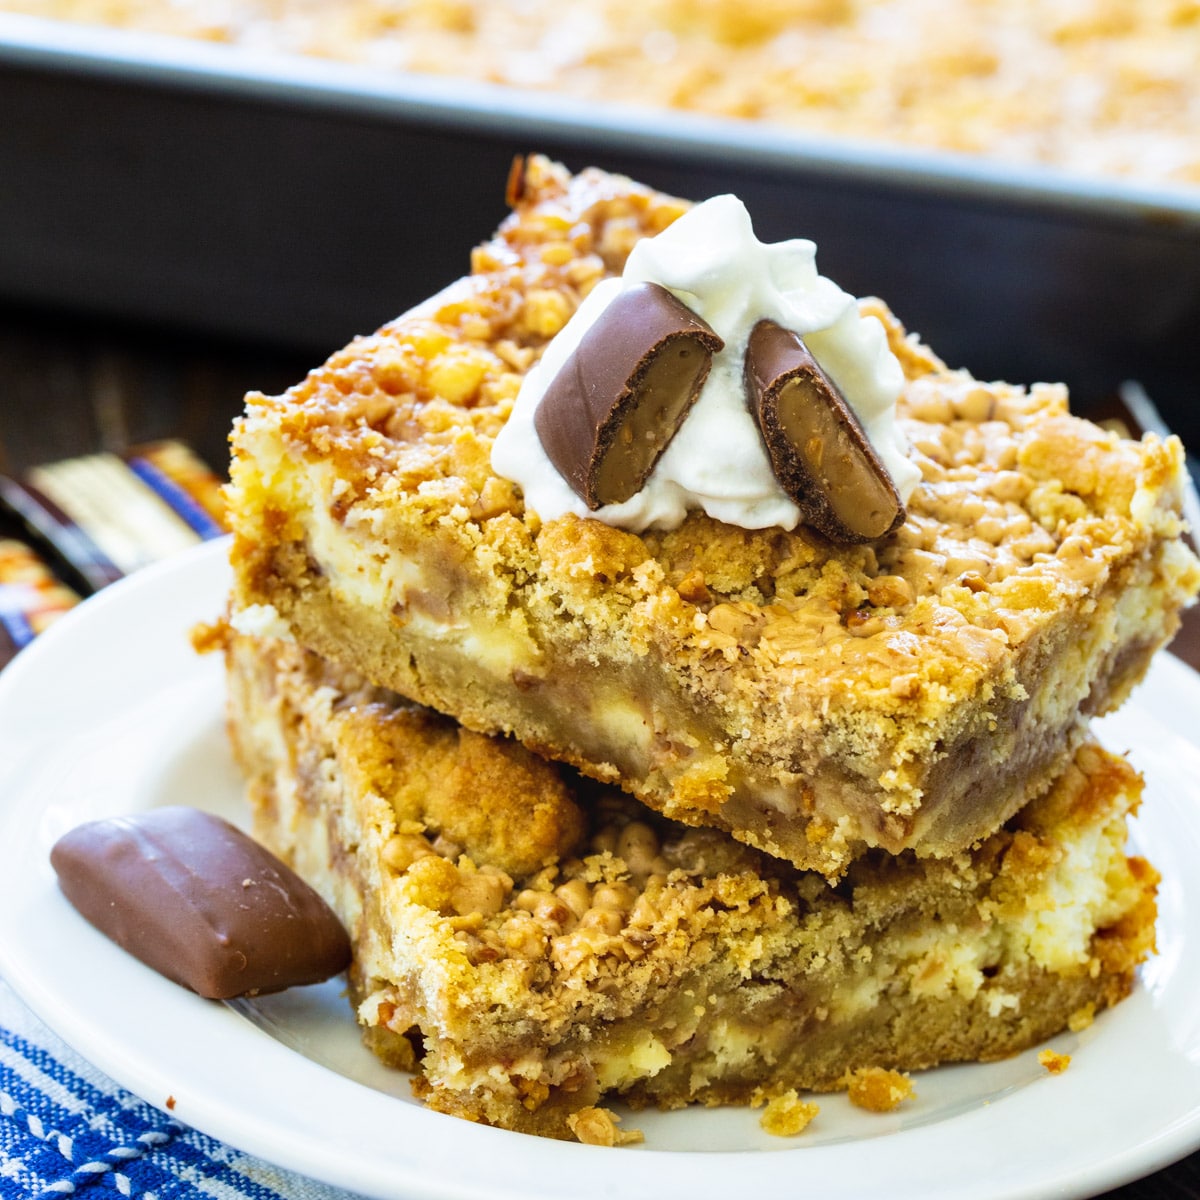 Two Toffee Cheesecake Bars stacked on a plate.